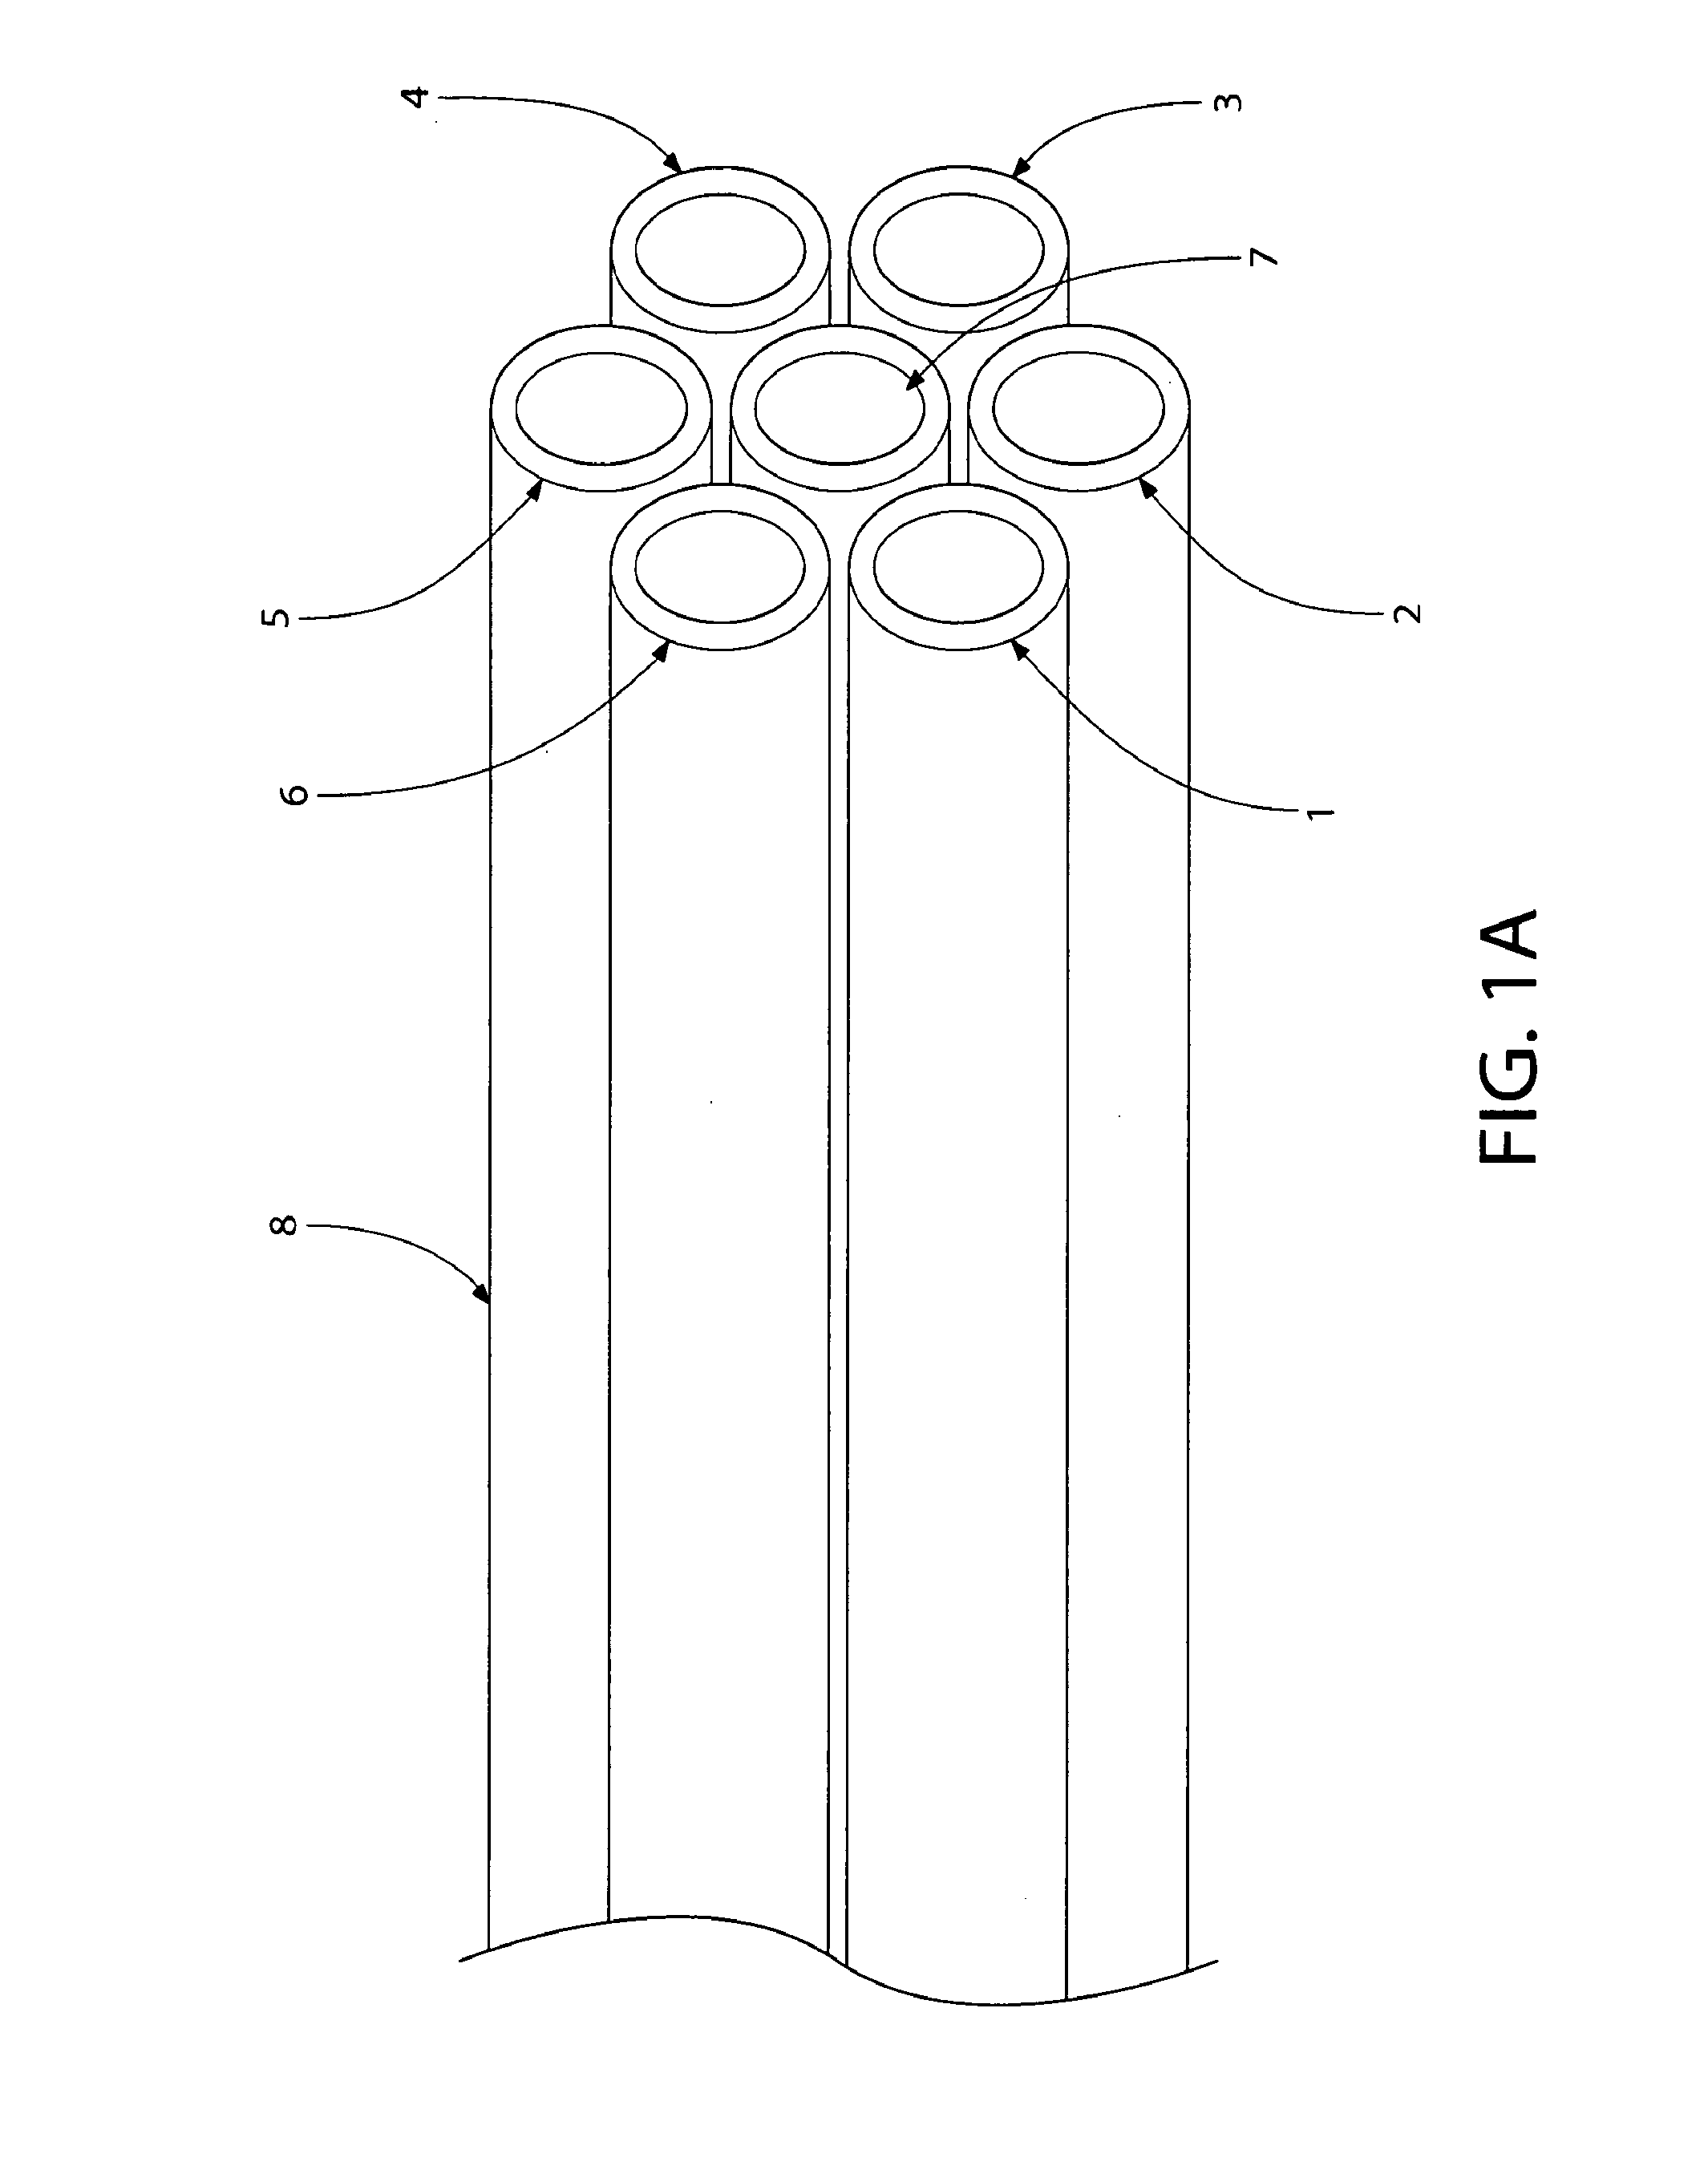 Hollow fiber cartridges and components and methods of their construction